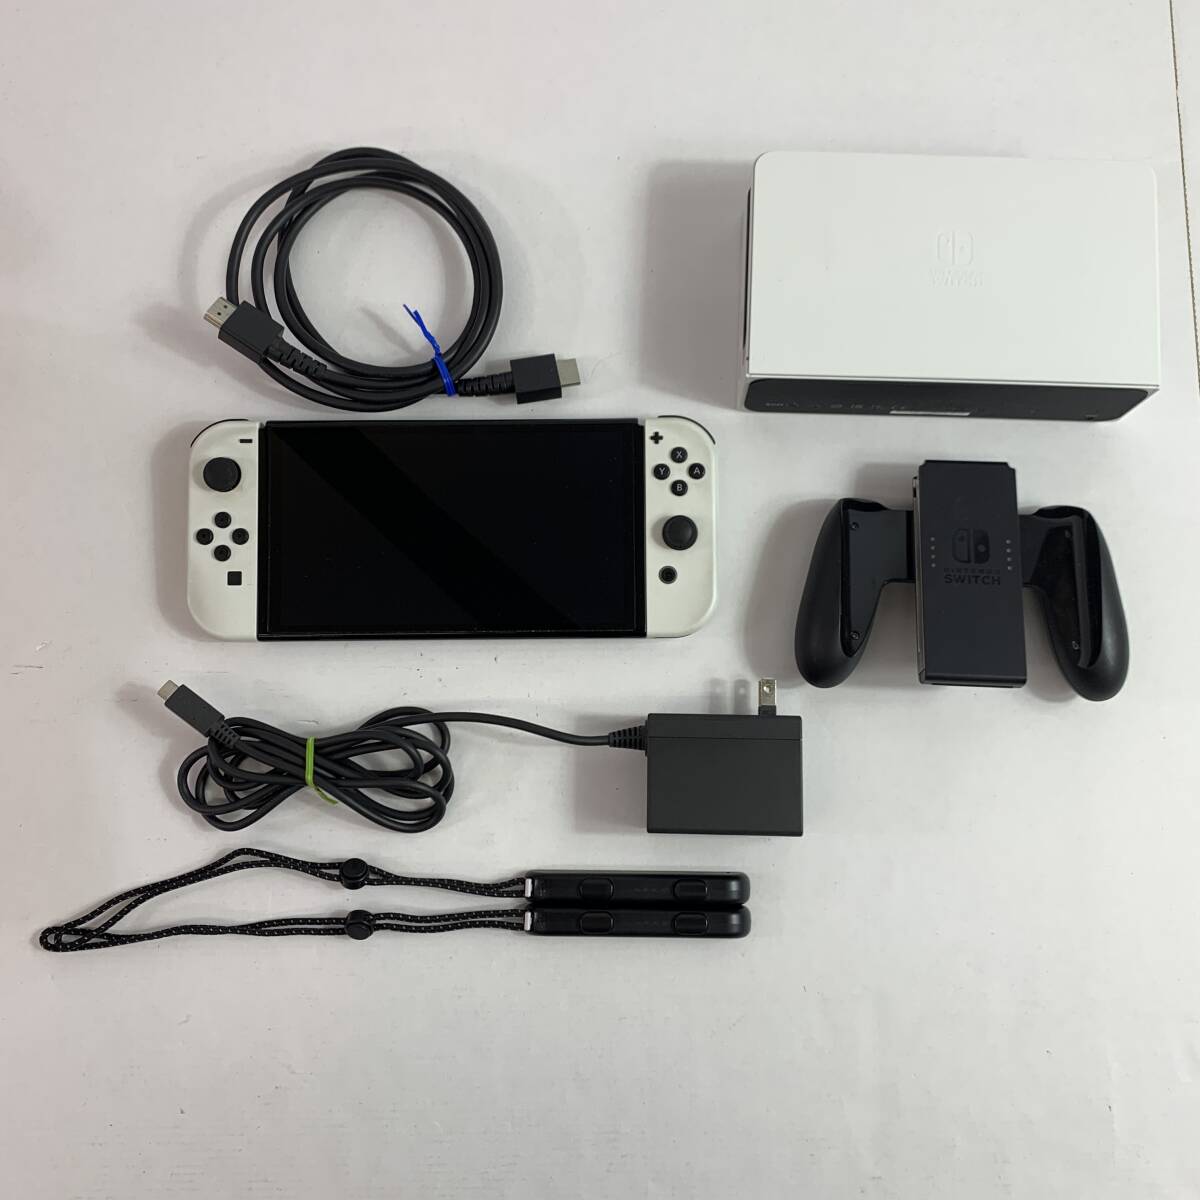 (25585) # Nintendo Switch have machine EL body 64GB SD card attaching secondhand goods 